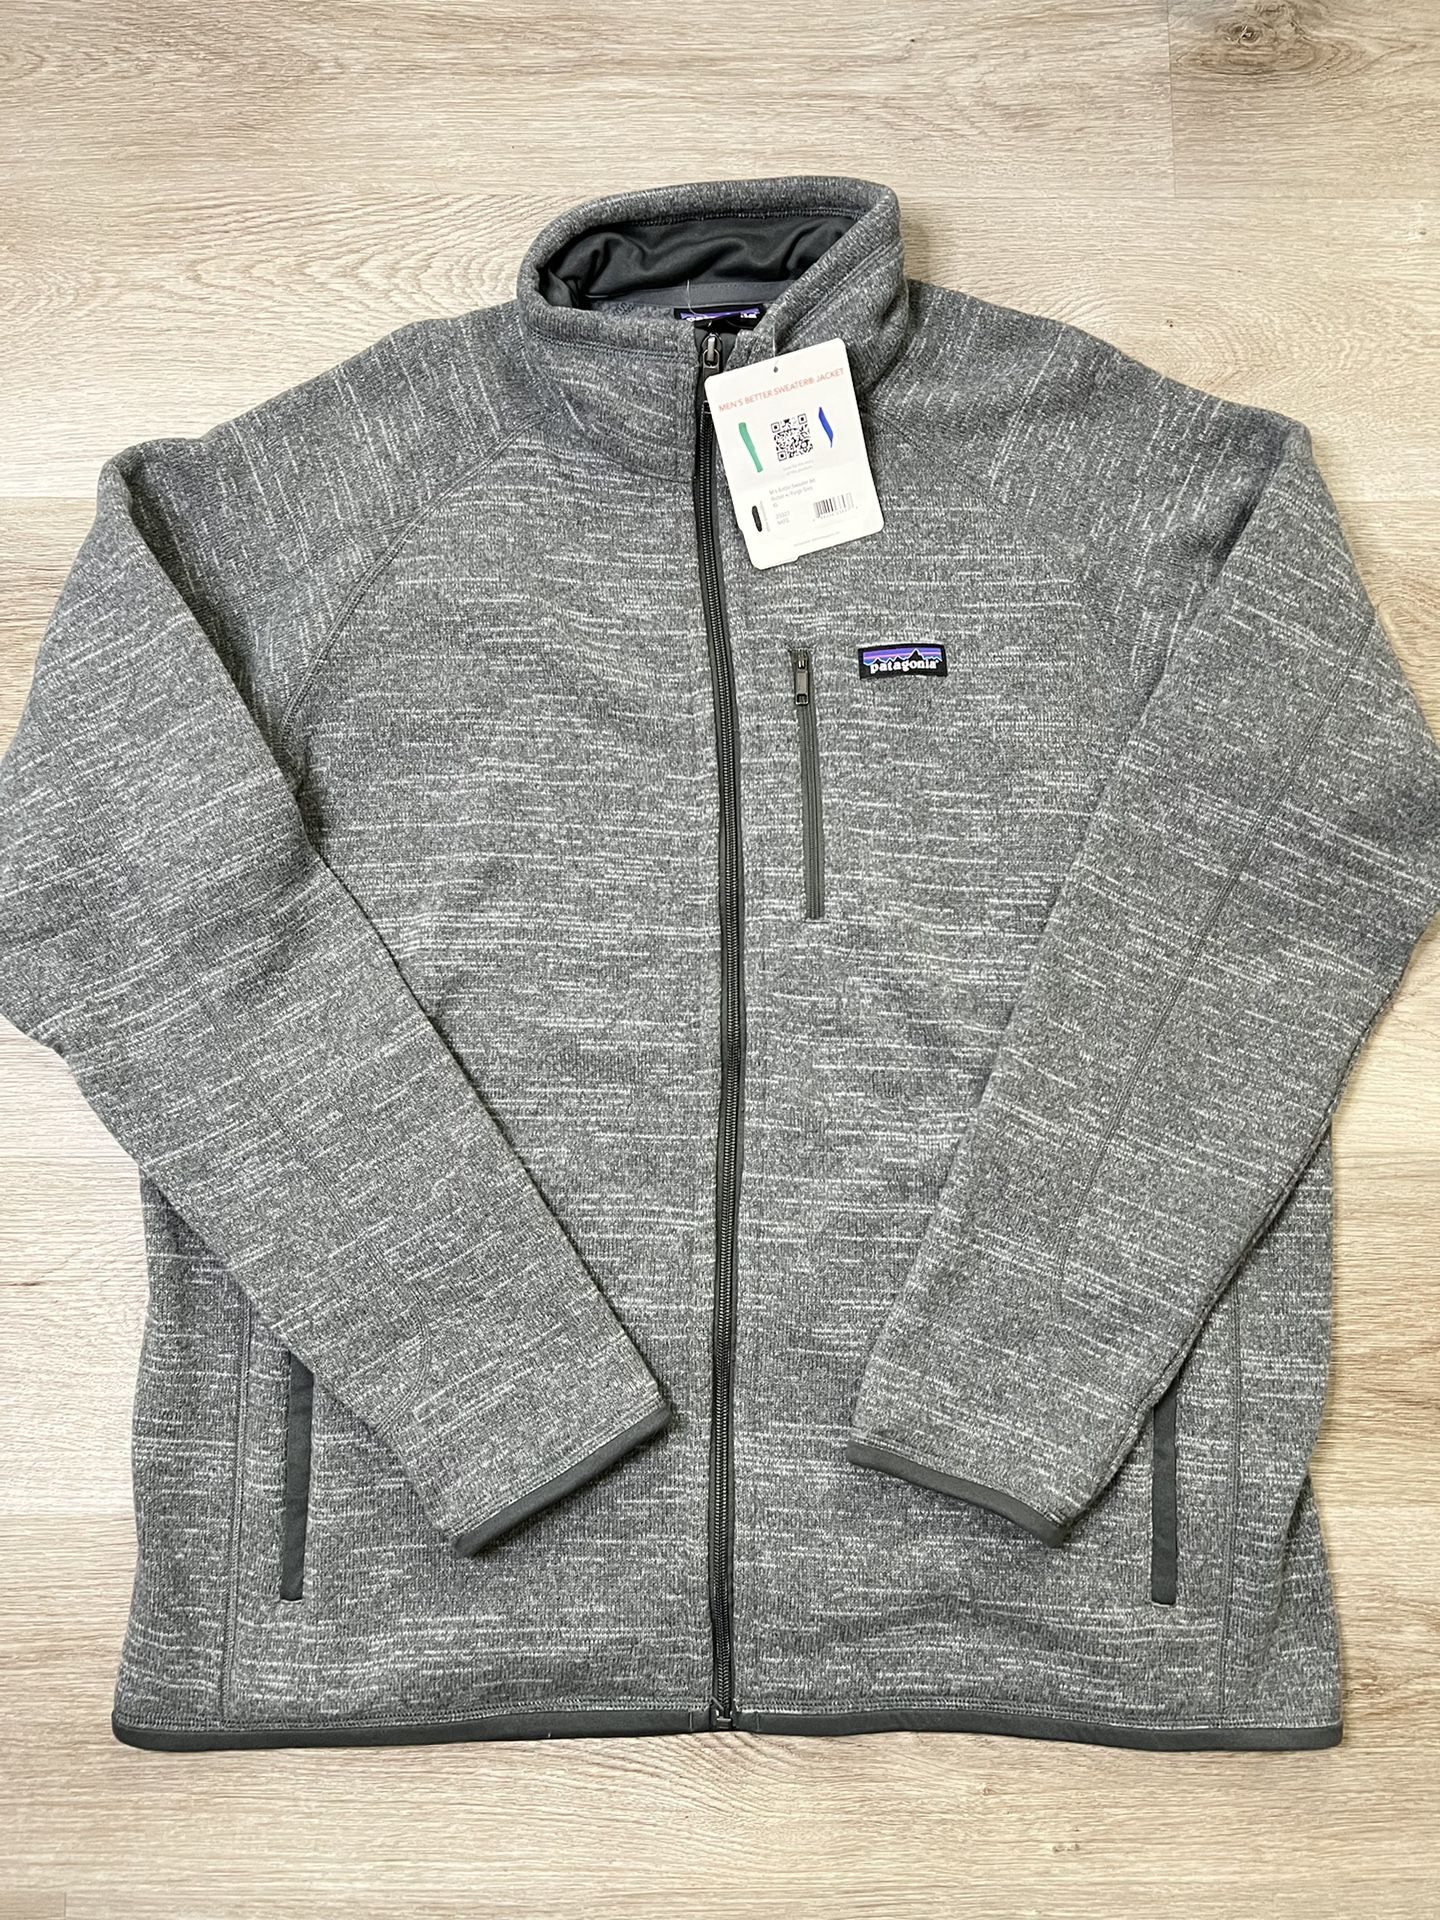 Patagonia Better Sweater Jacket Mens X-Large Brand New